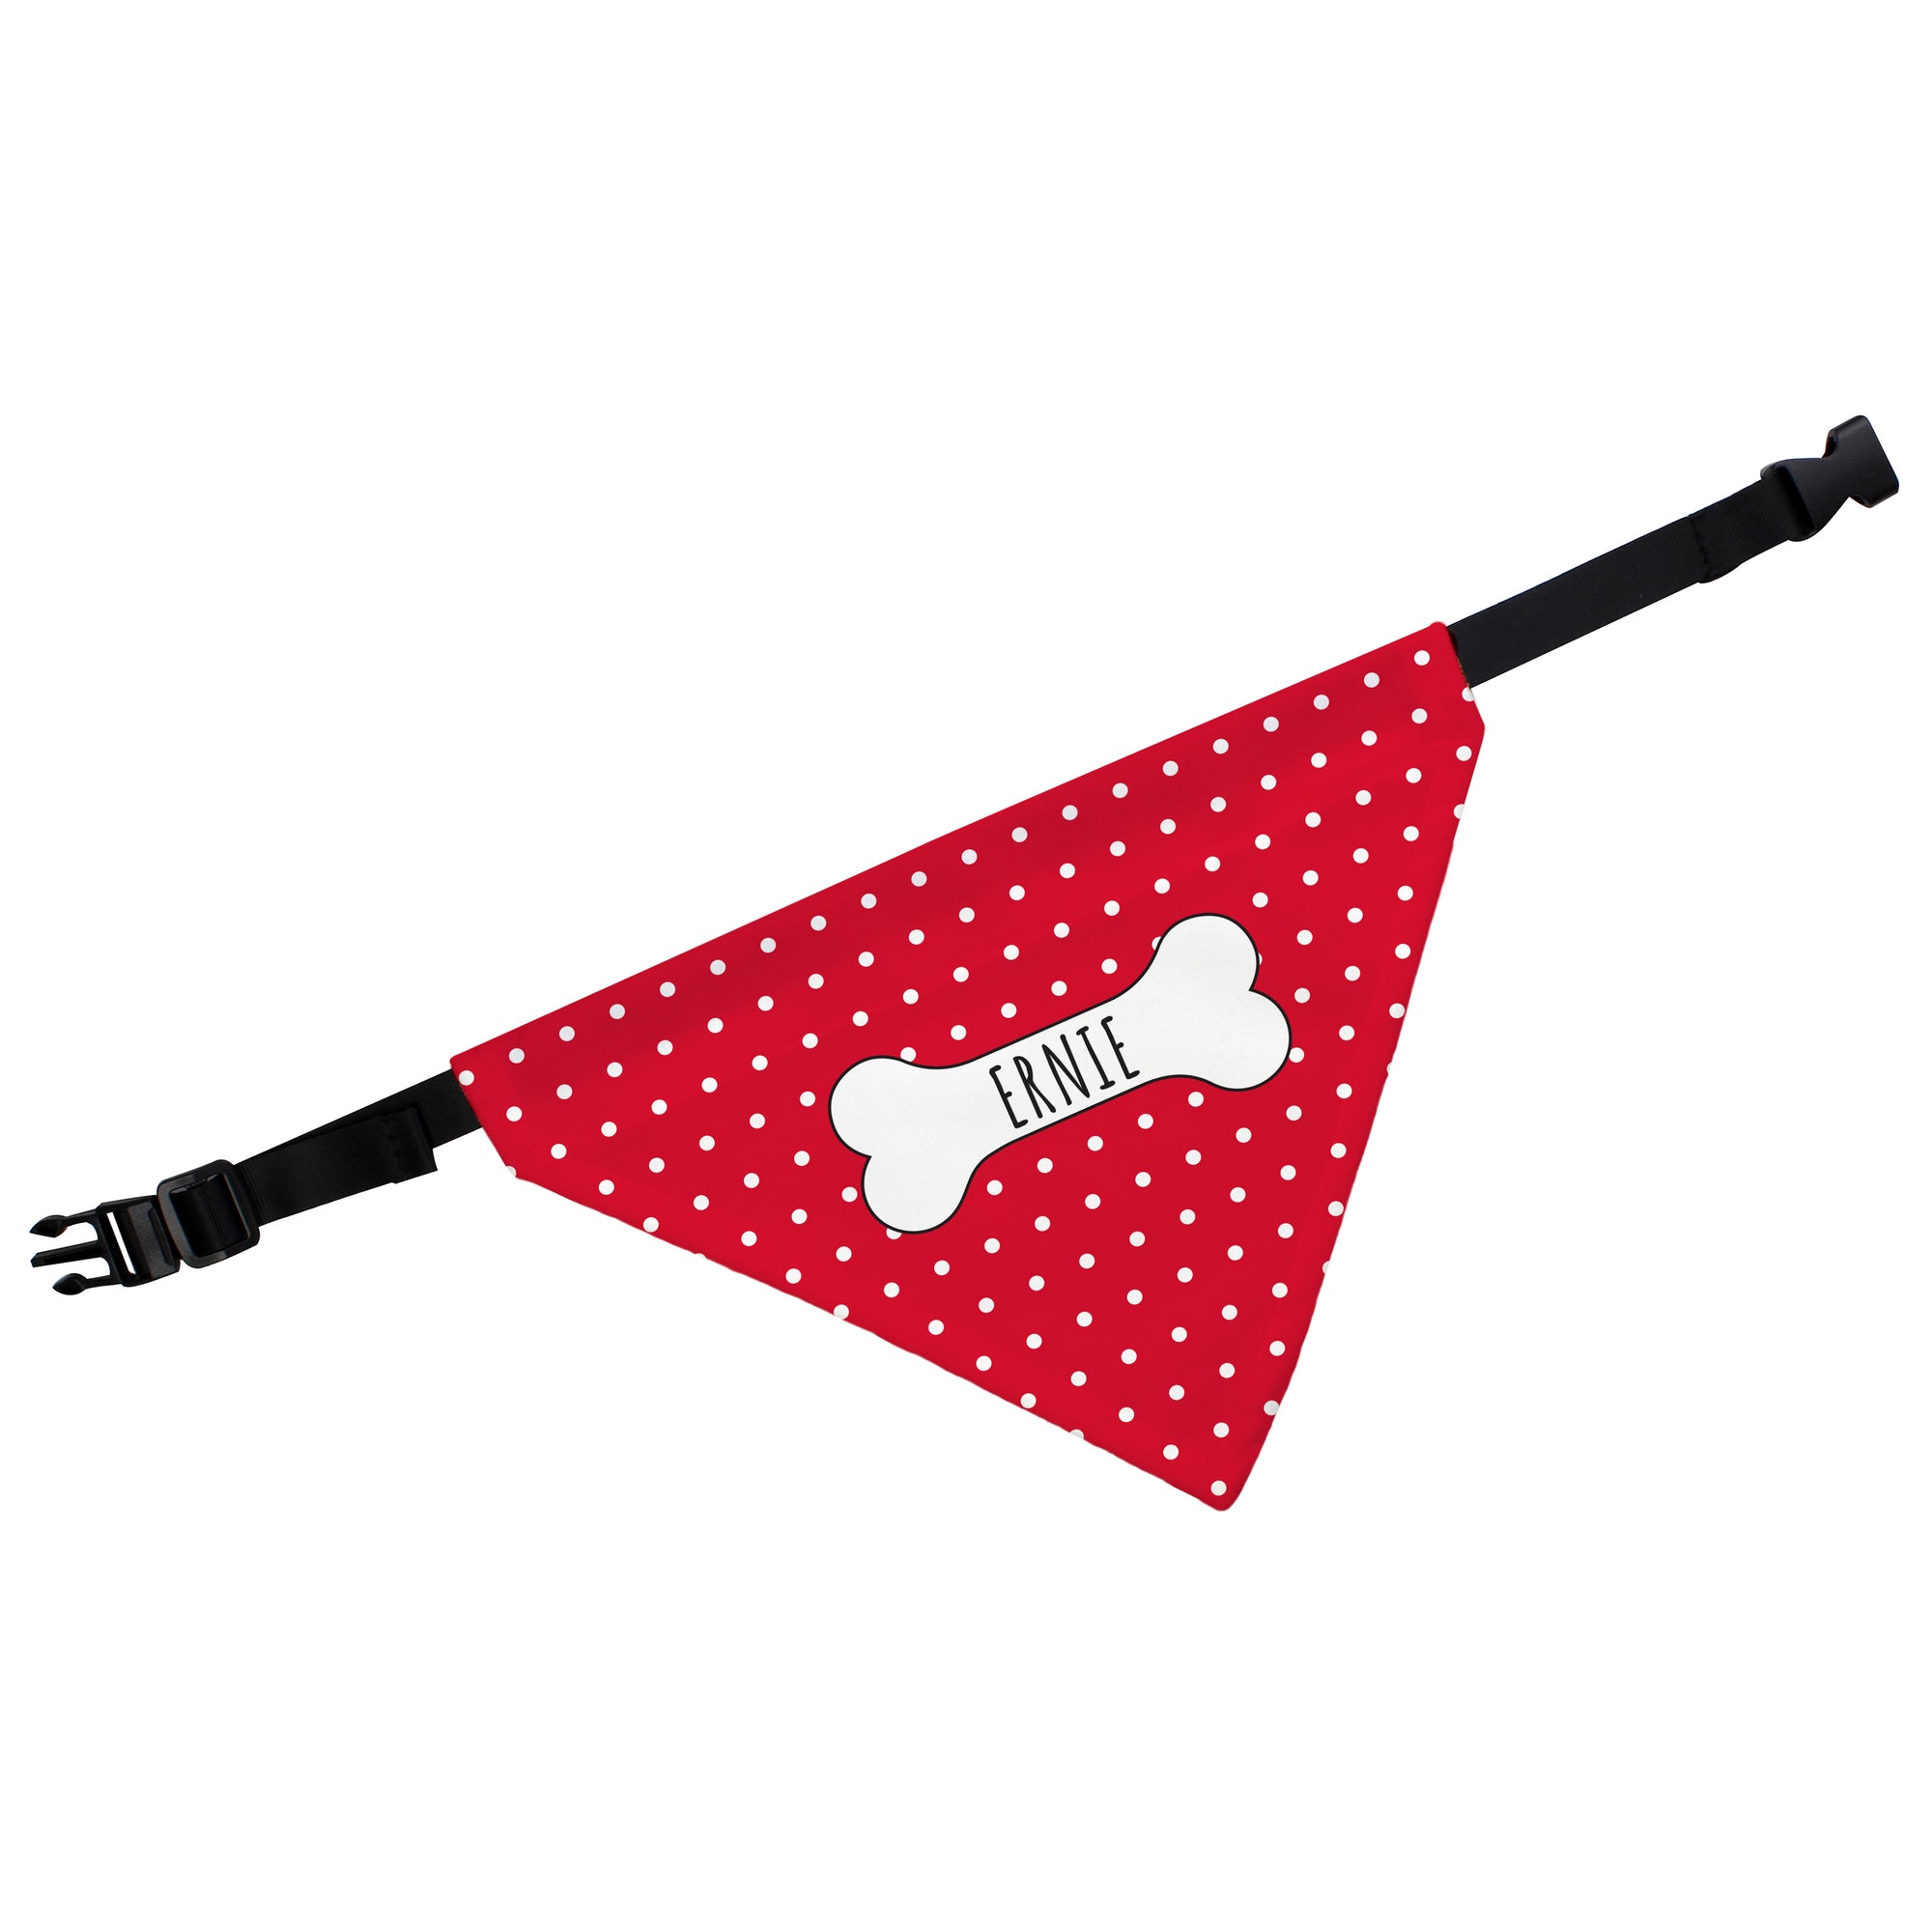 Imaage of a red polka dot bandana for dogs which can be personalised with a name